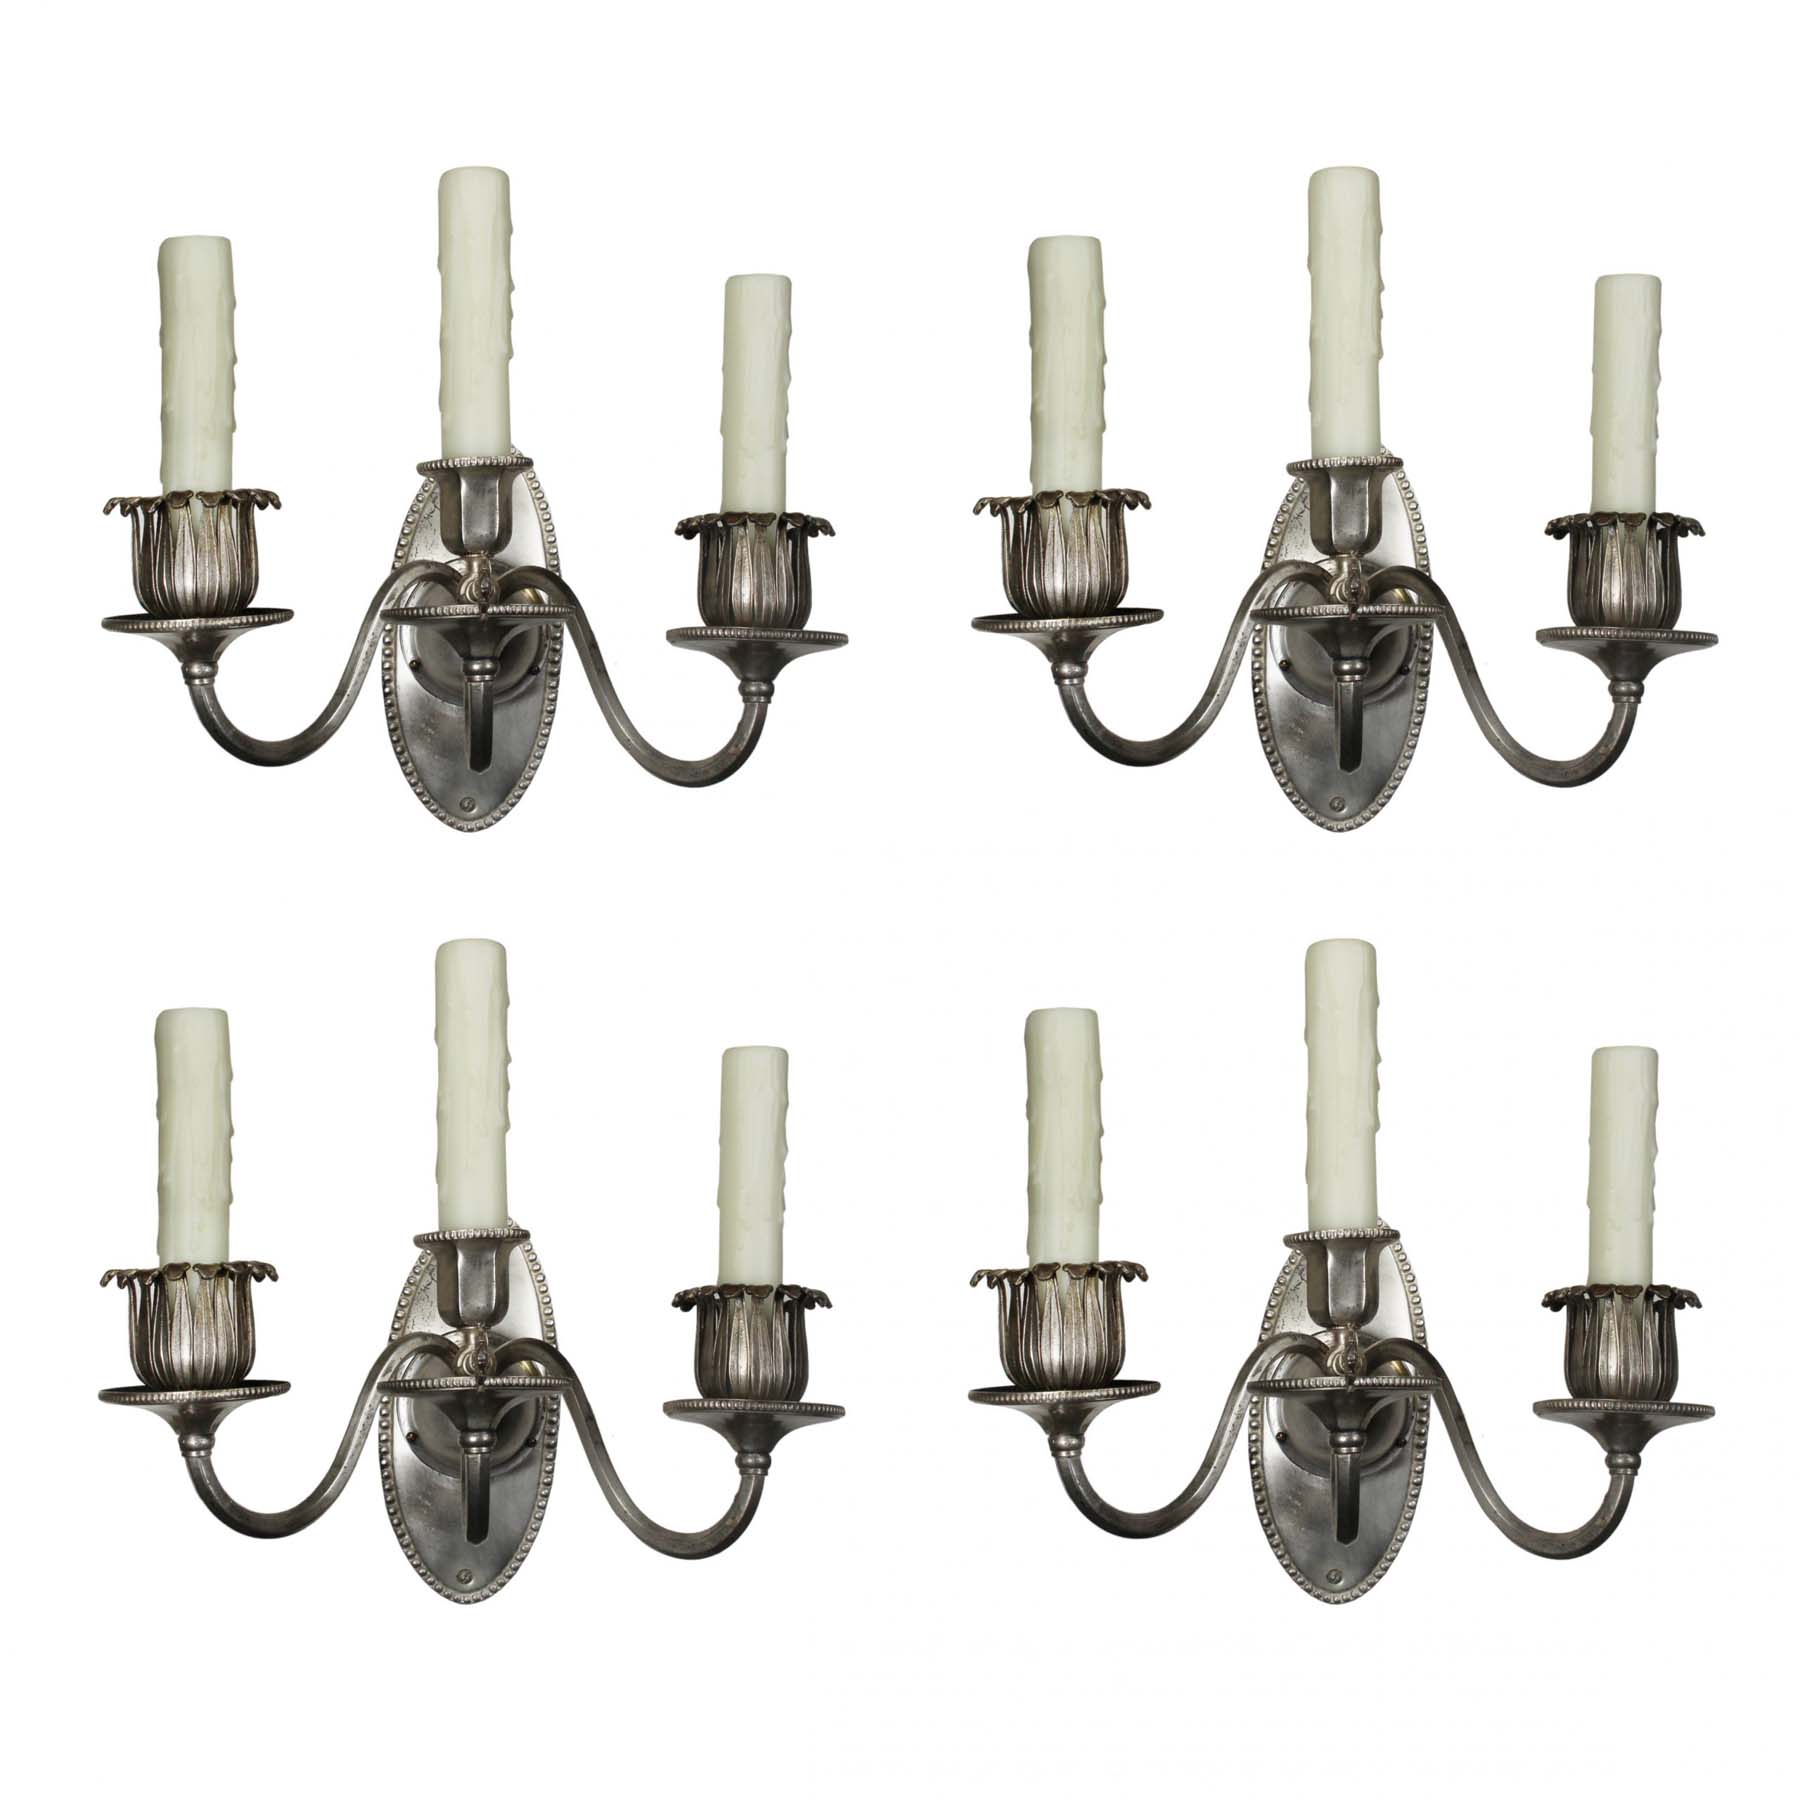 Matching Pairs of Antique Silver-Plated Three-Arm Sconces, c. 1905-0